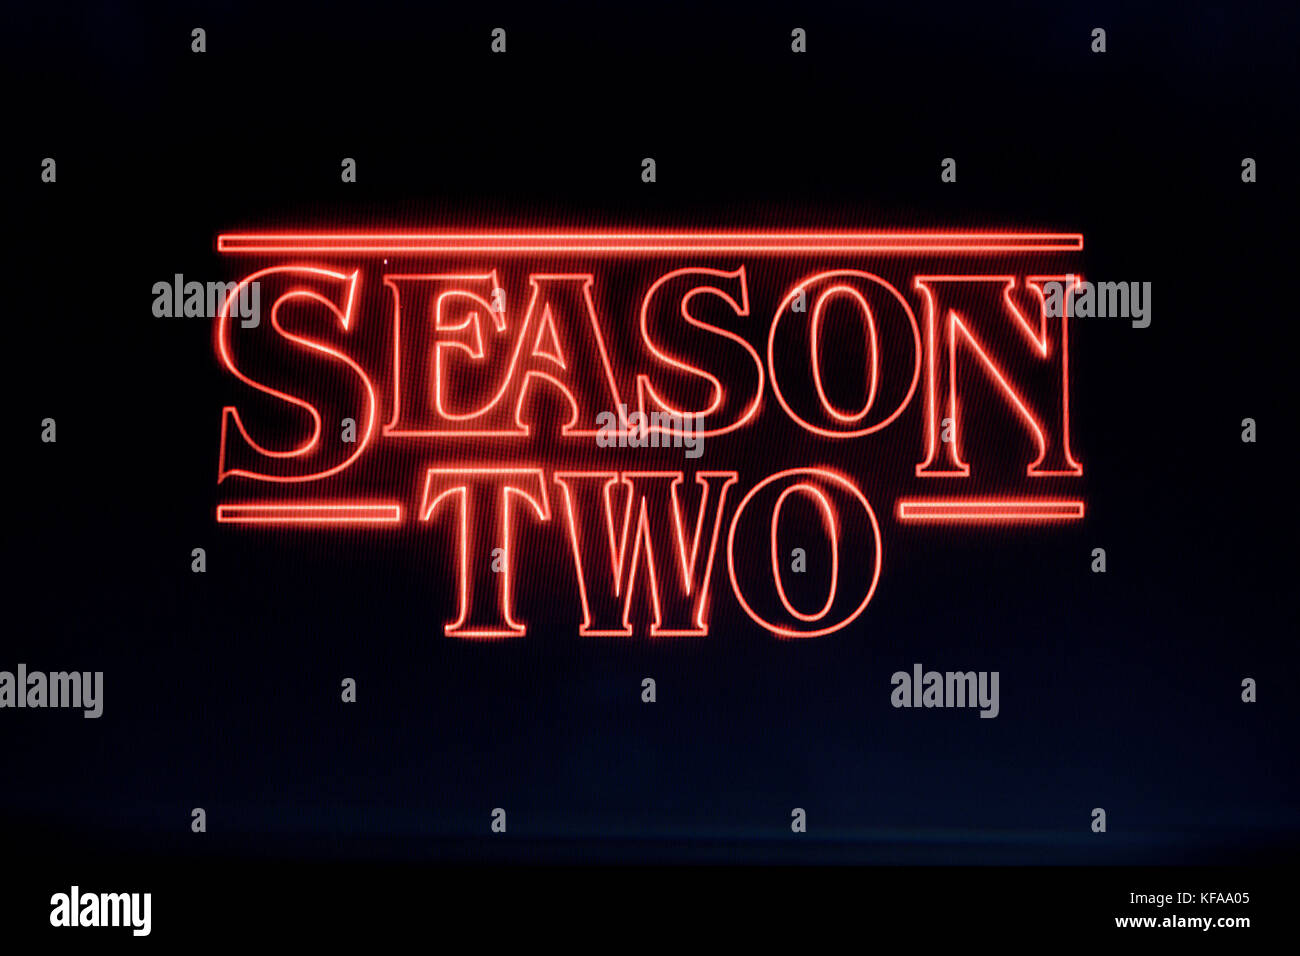 LONDON, UK - OCTOBER 26th 2017: Stranger things title logo photographed on a computer screen. Stock Photo